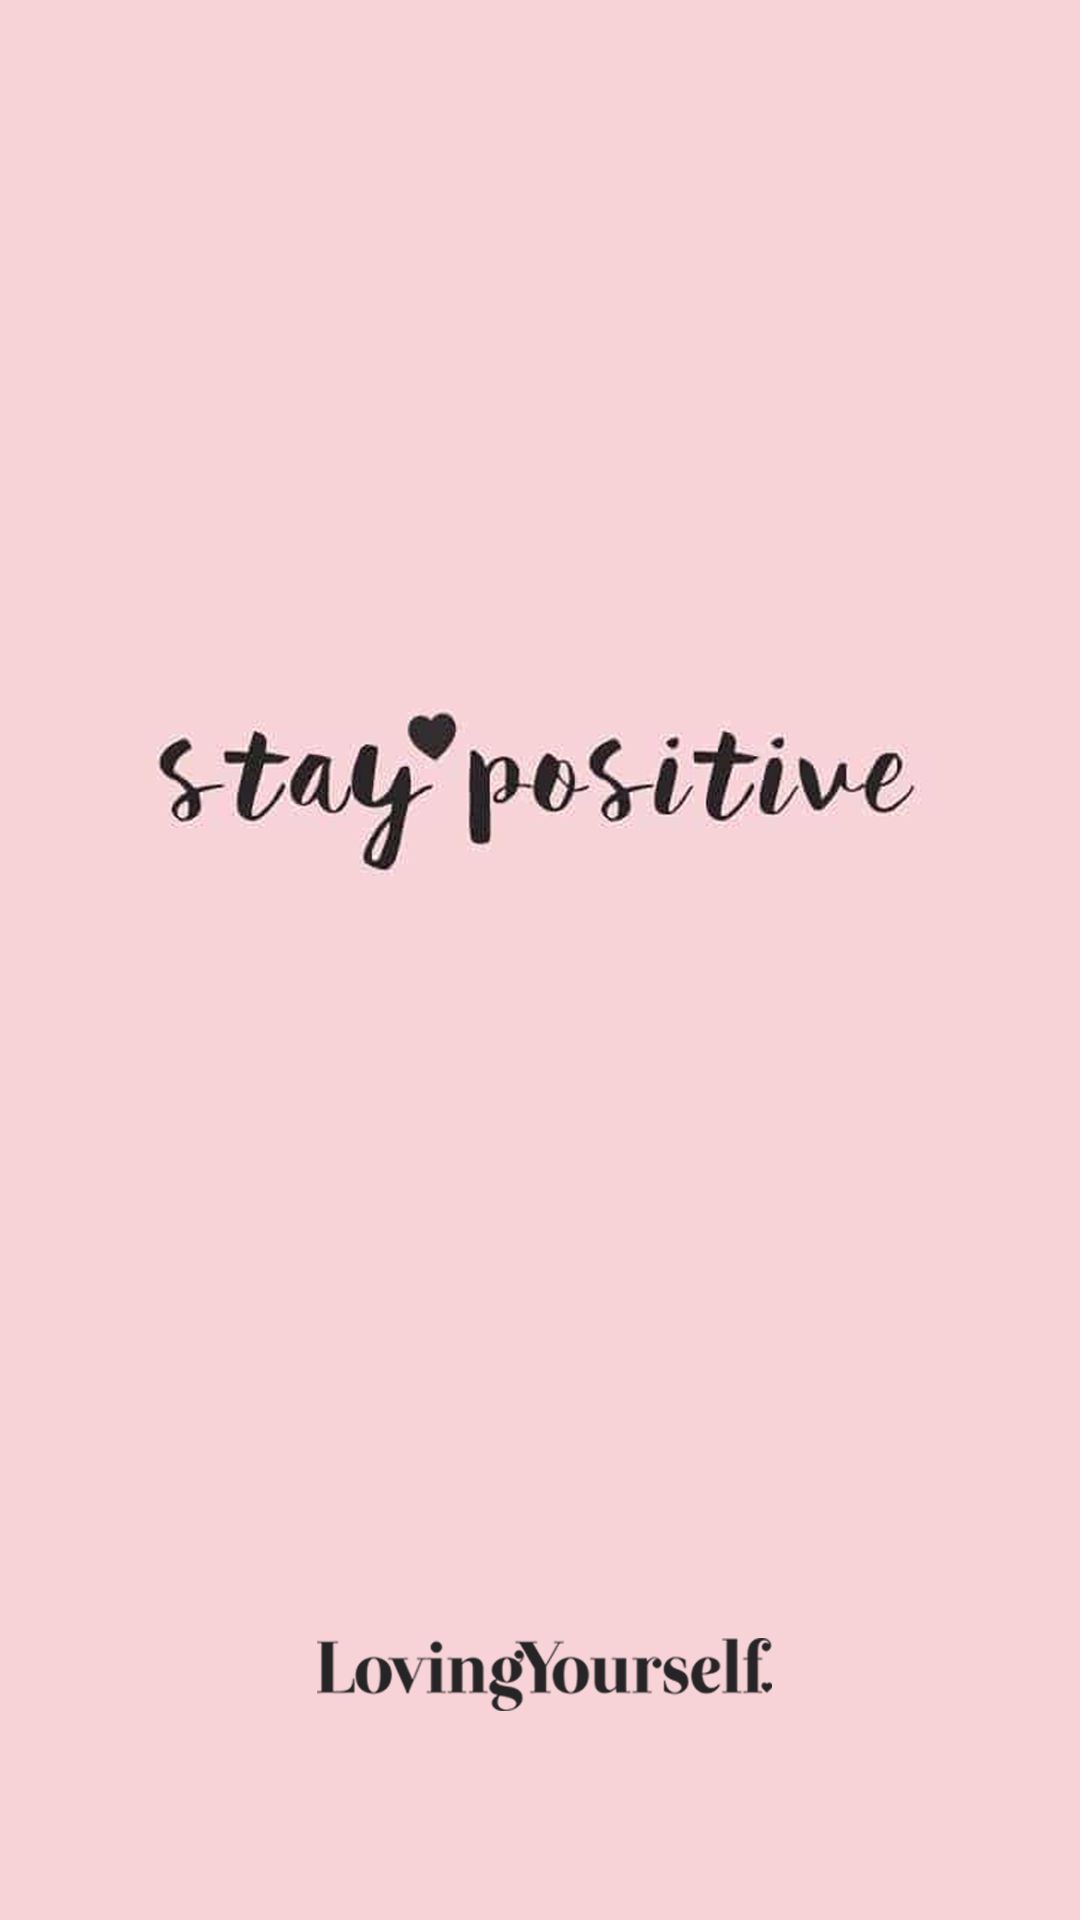 Stay Positive Wallpaper. Positive wallpaper, Daily motivational quotes, Positivity